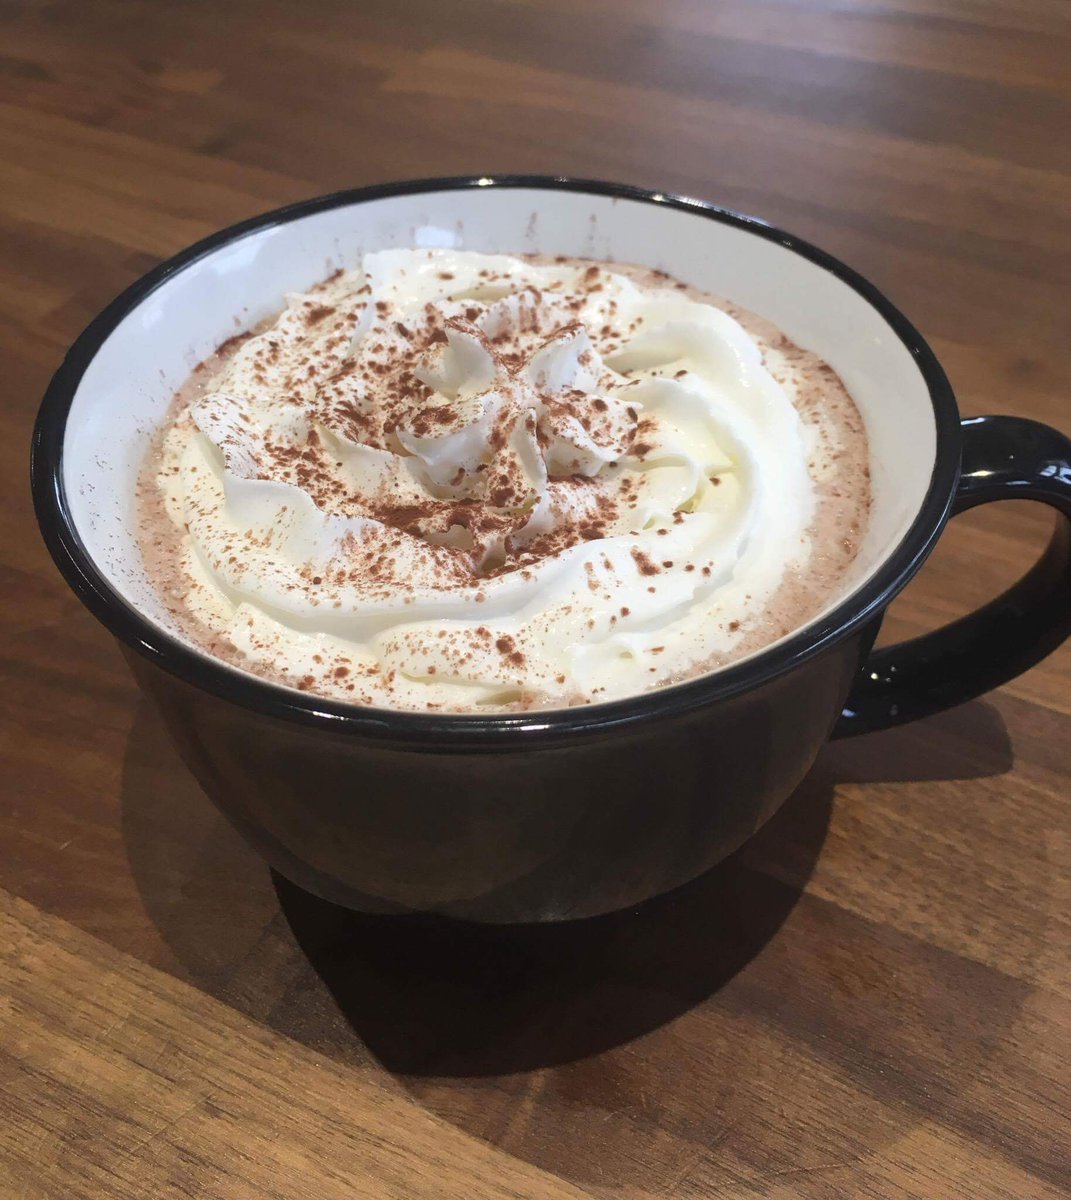 It's National Hot Cocoa Day! Come in today and get a delicious hot cocoa for here or to go! #nationalhotcocoaday #nationalcocoaday